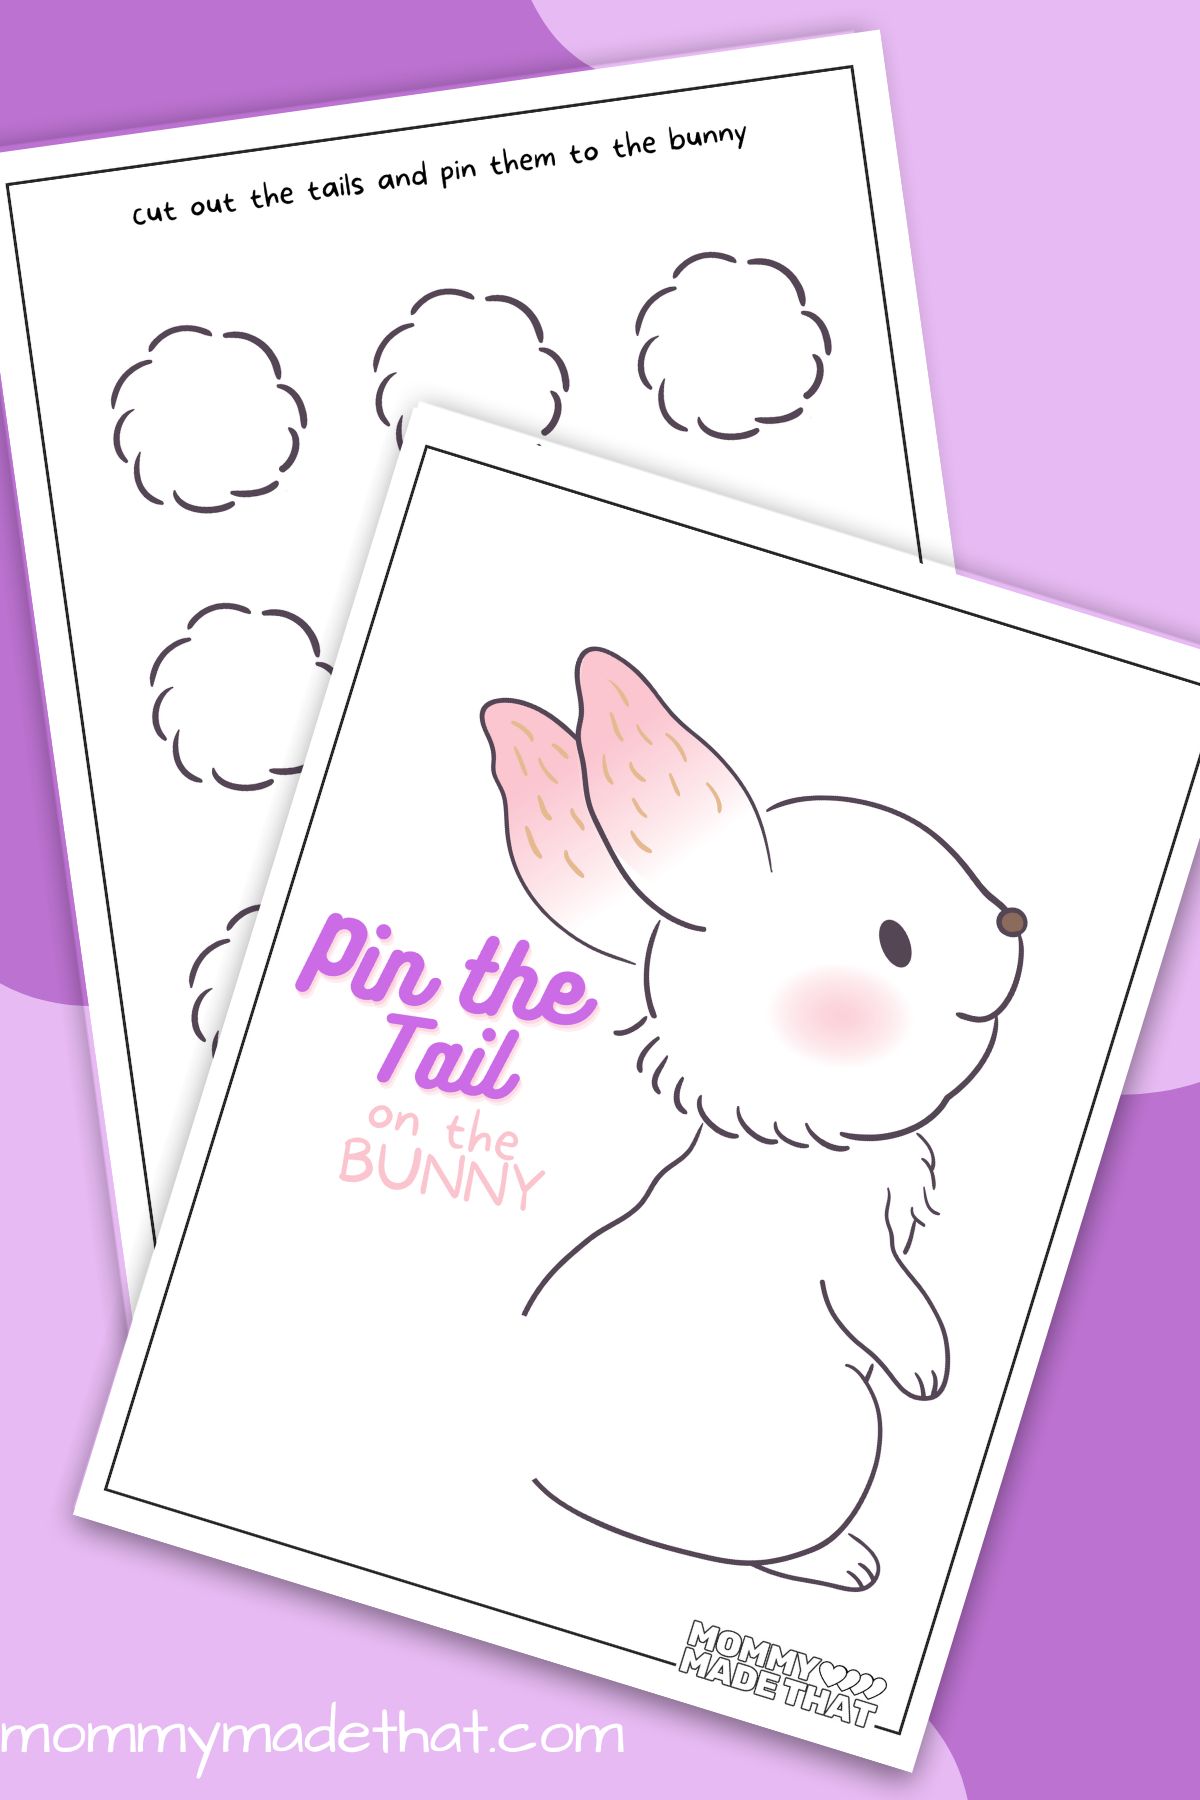 Pin the tail on the bunny